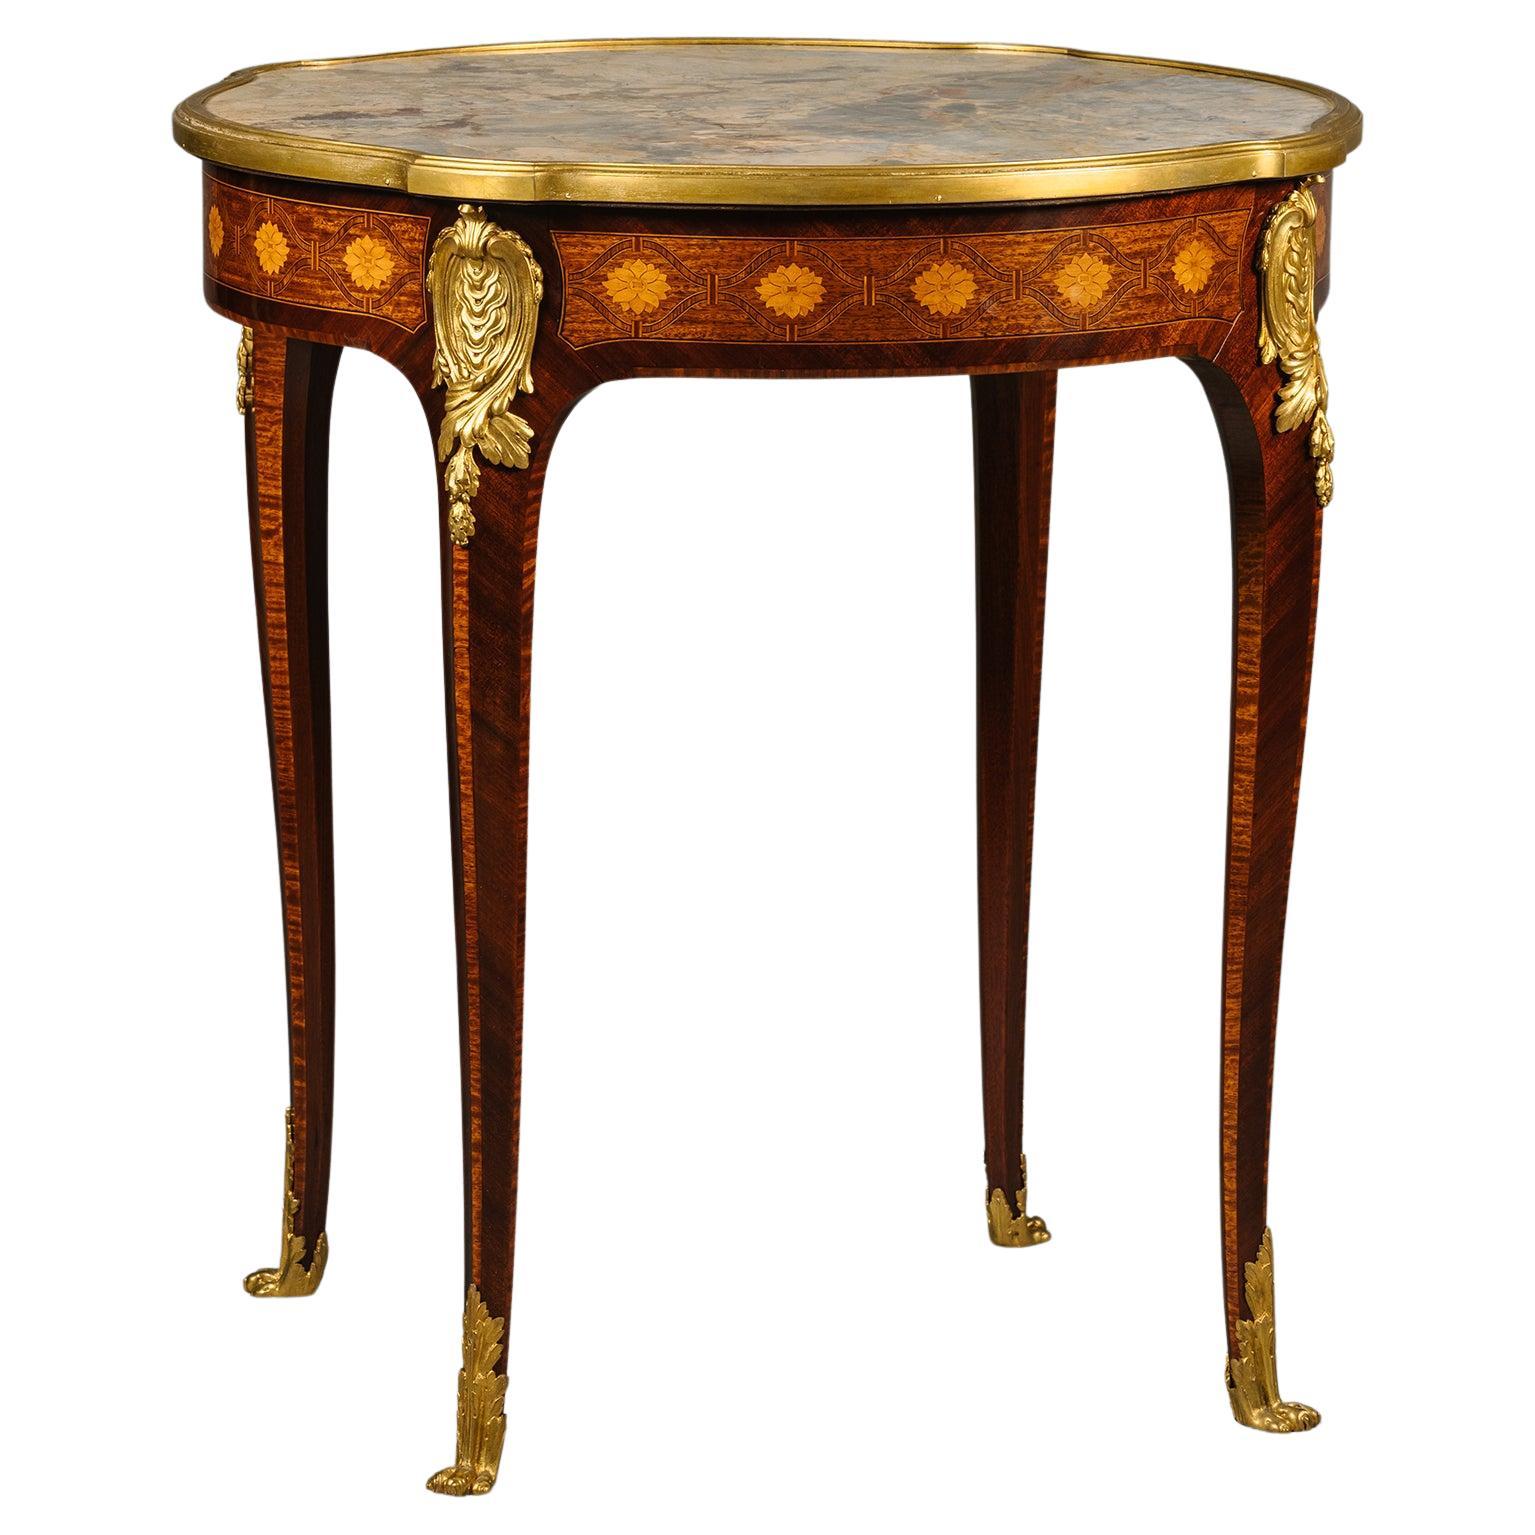  Louis XV Style Parquetry Occasional Table With A Sarrancolin Marble Top For Sale